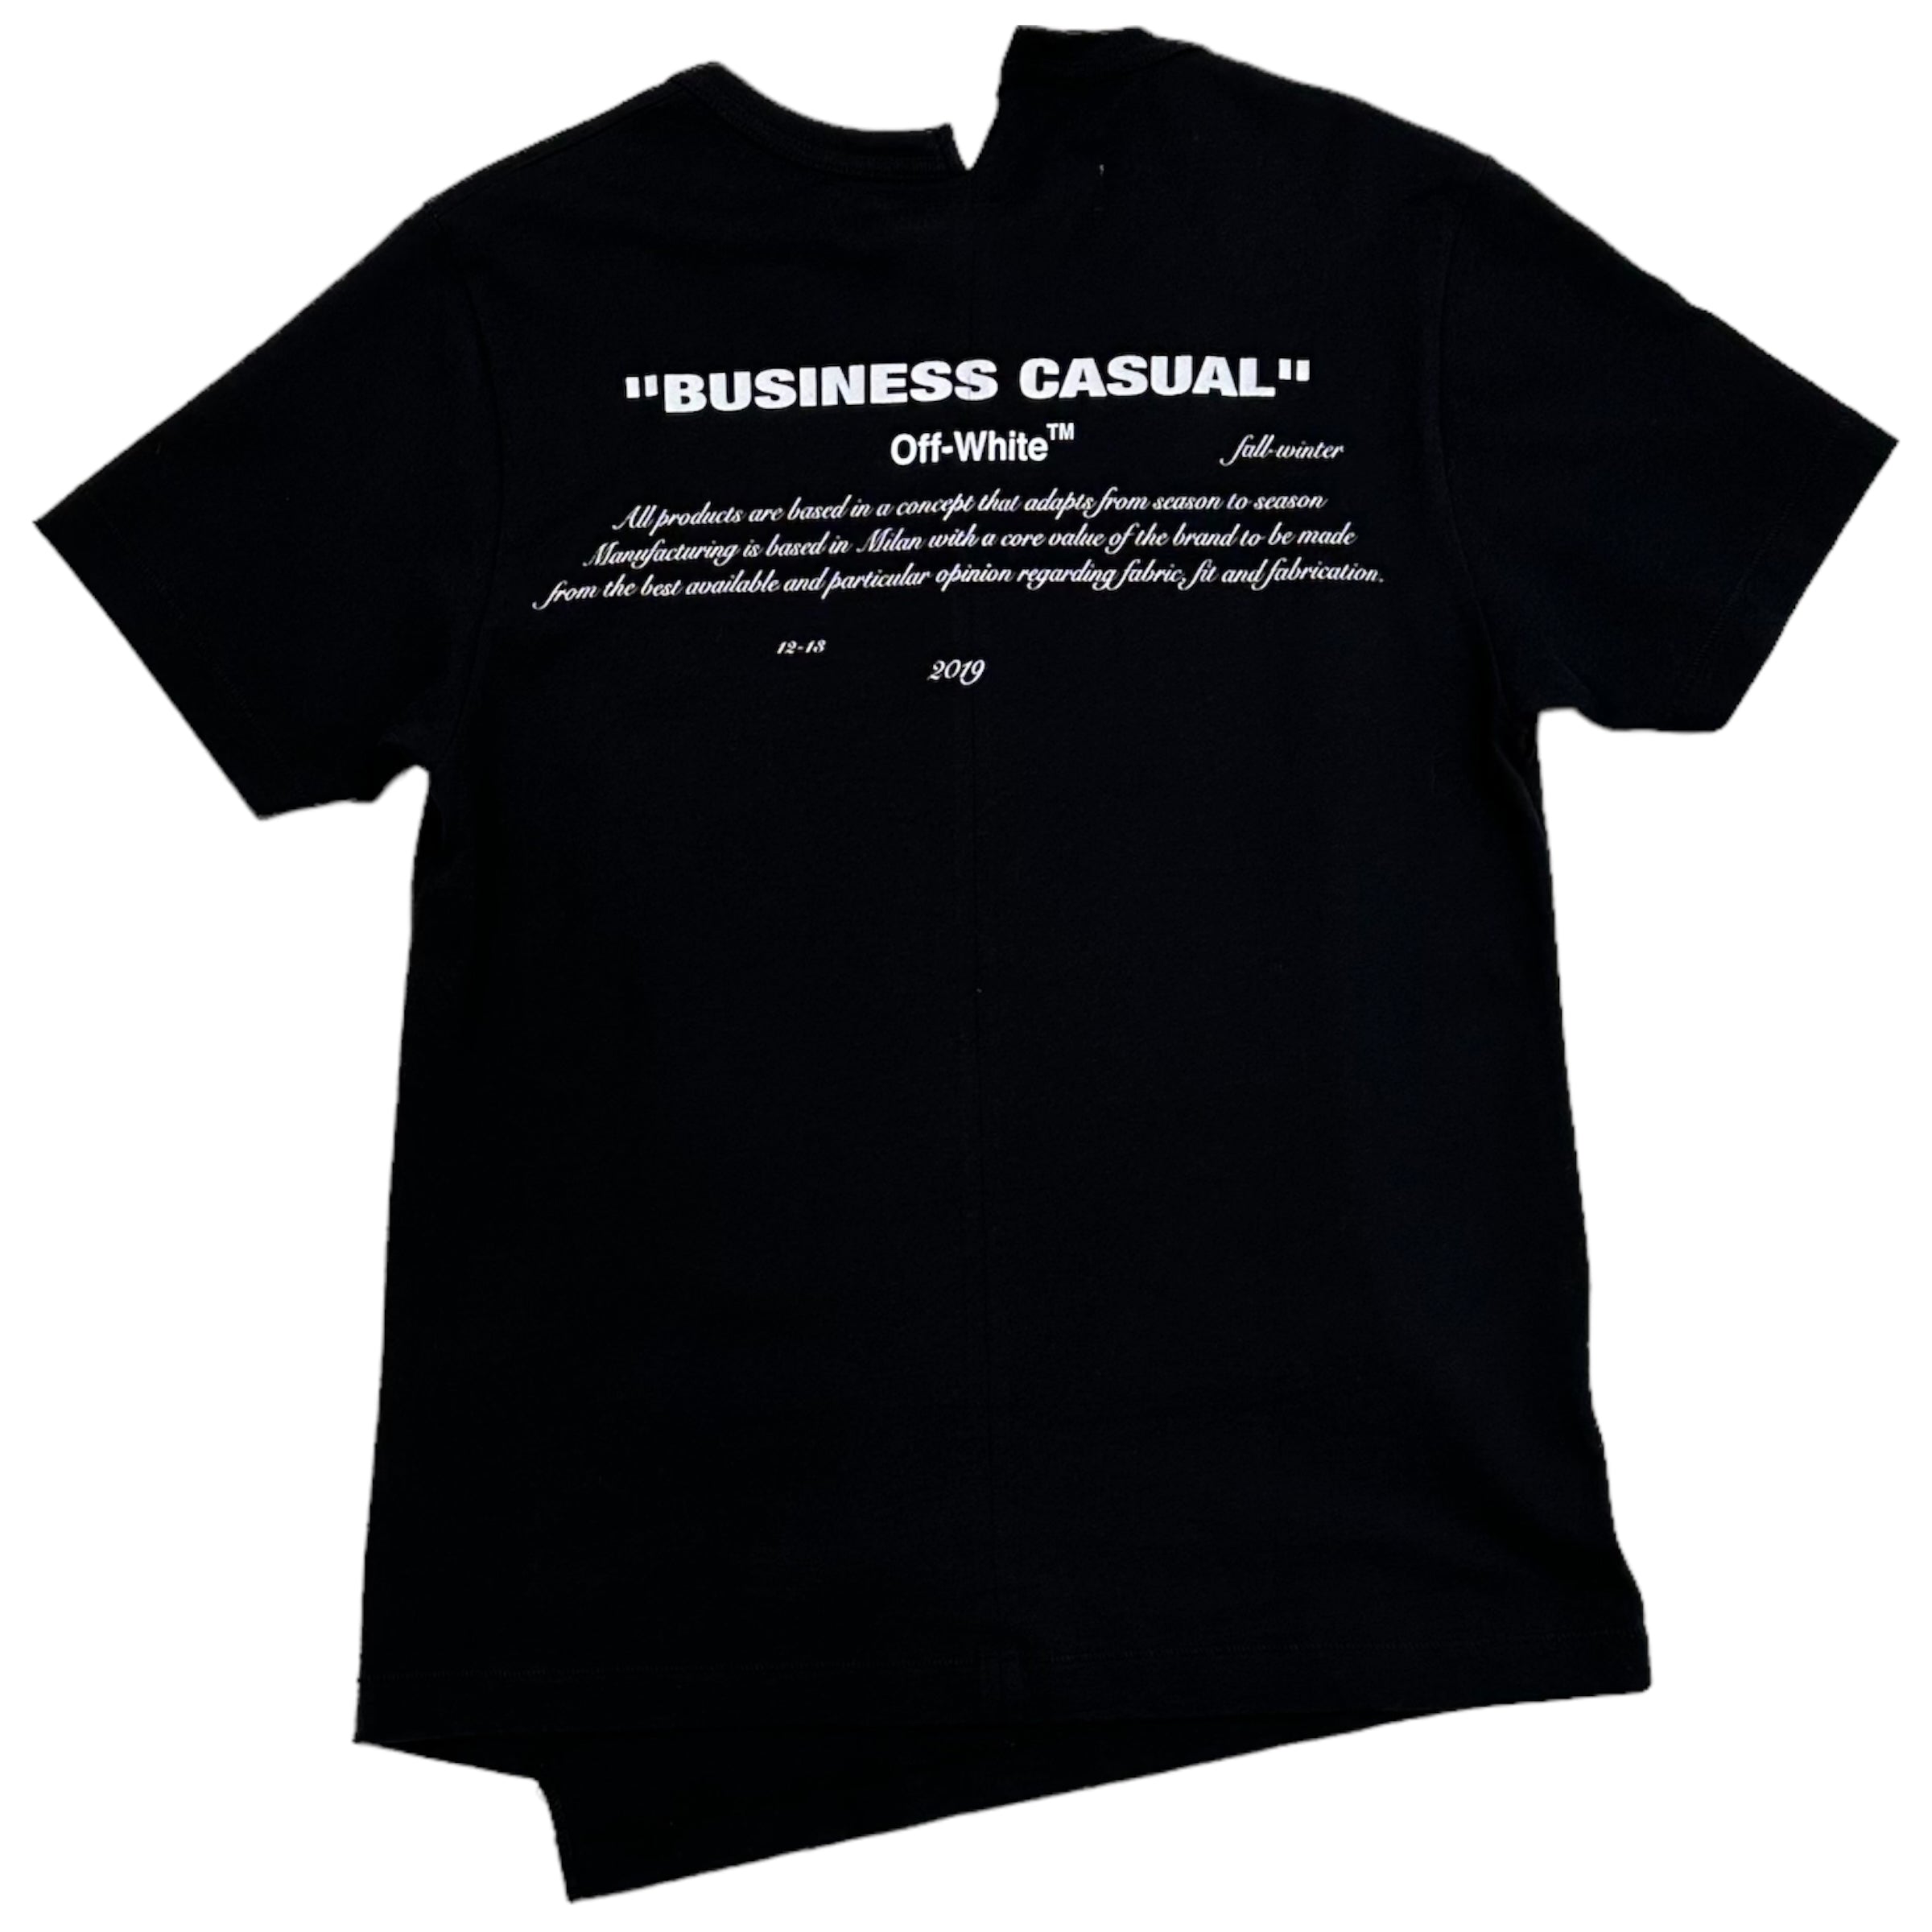 Off-White "Business Casual" Tee (S)